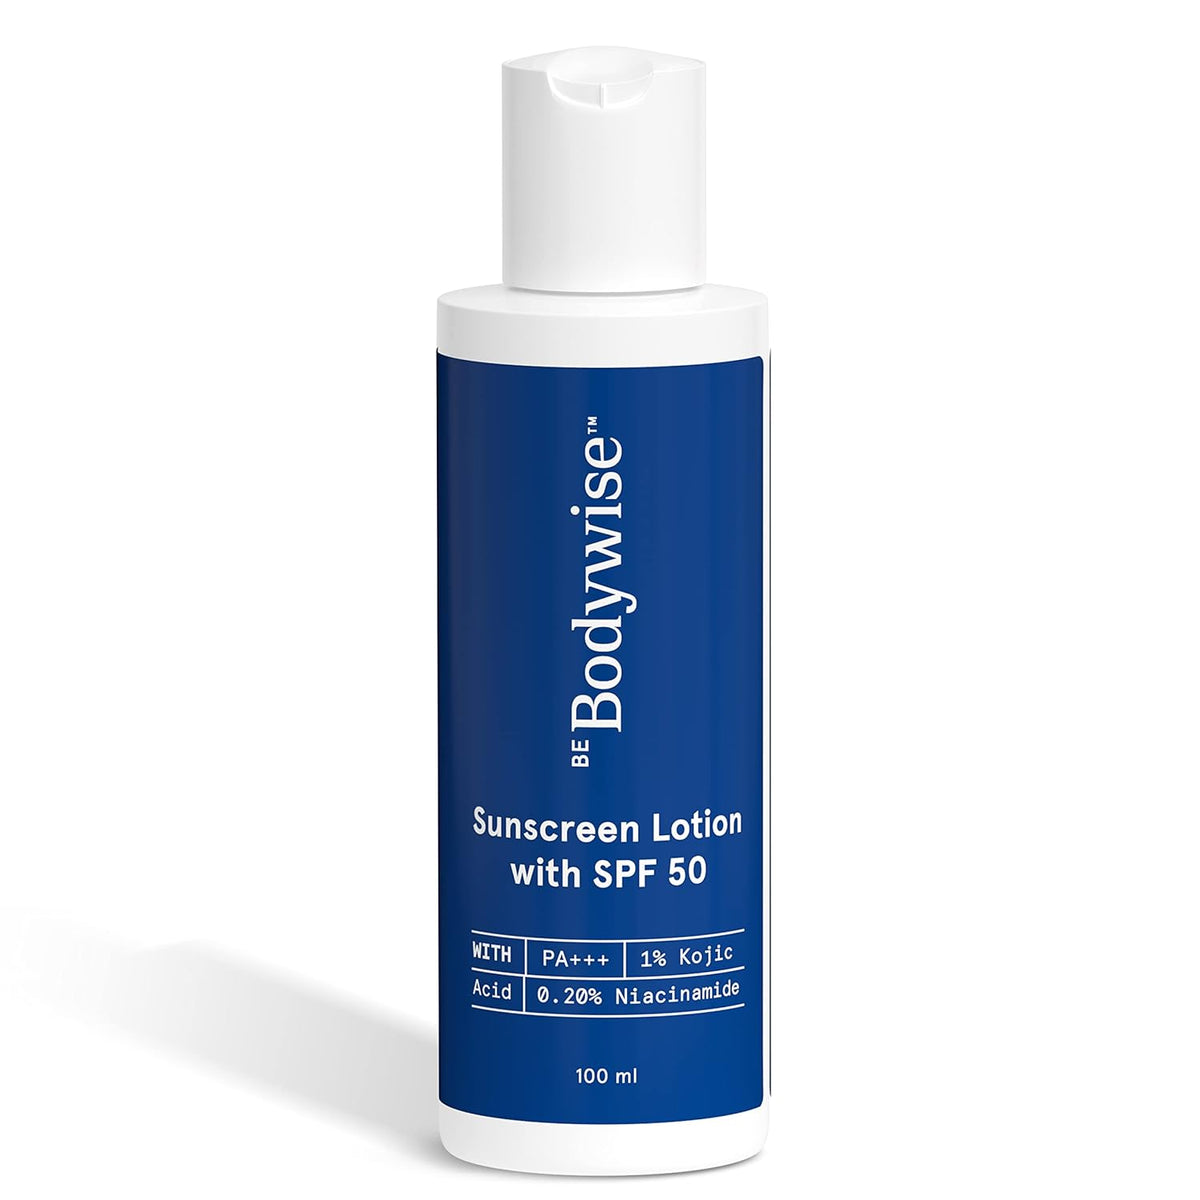 Be Bodywise Sunscreen Lotion with SPF 50 PA+++ | With 1% Kojic Acid & 0.20% Niacinamide | Prevents Sun Tan, Leaves No White Cast & Gives Broad Spectrum Protection | 100m